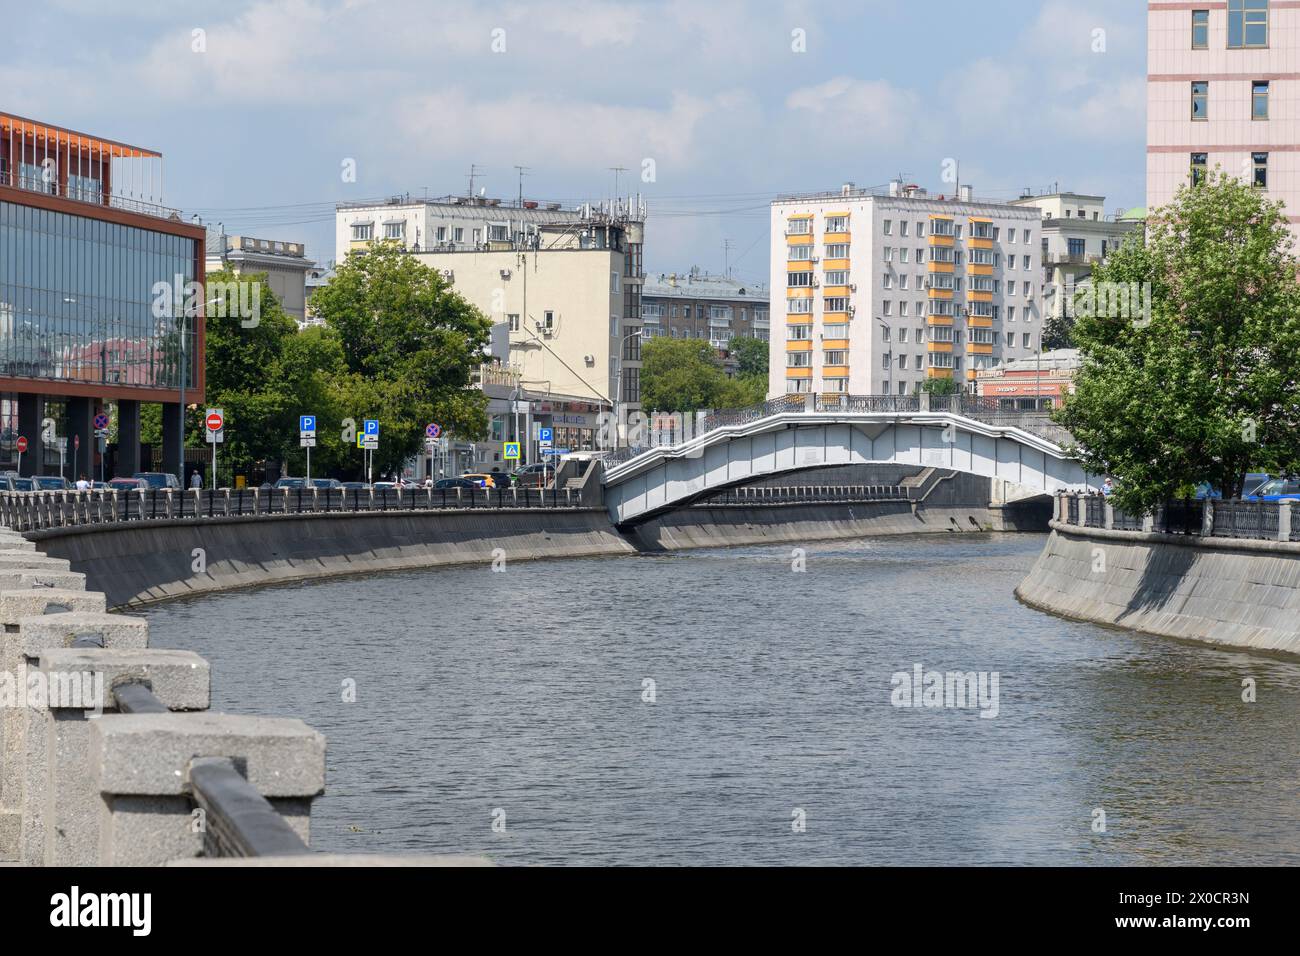 Moscow, Russia - 17 Jul 2018: A serene moment captured where architectural innovation meets natural beauty, showcasing a peaceful coexistence in the h Stock Photo